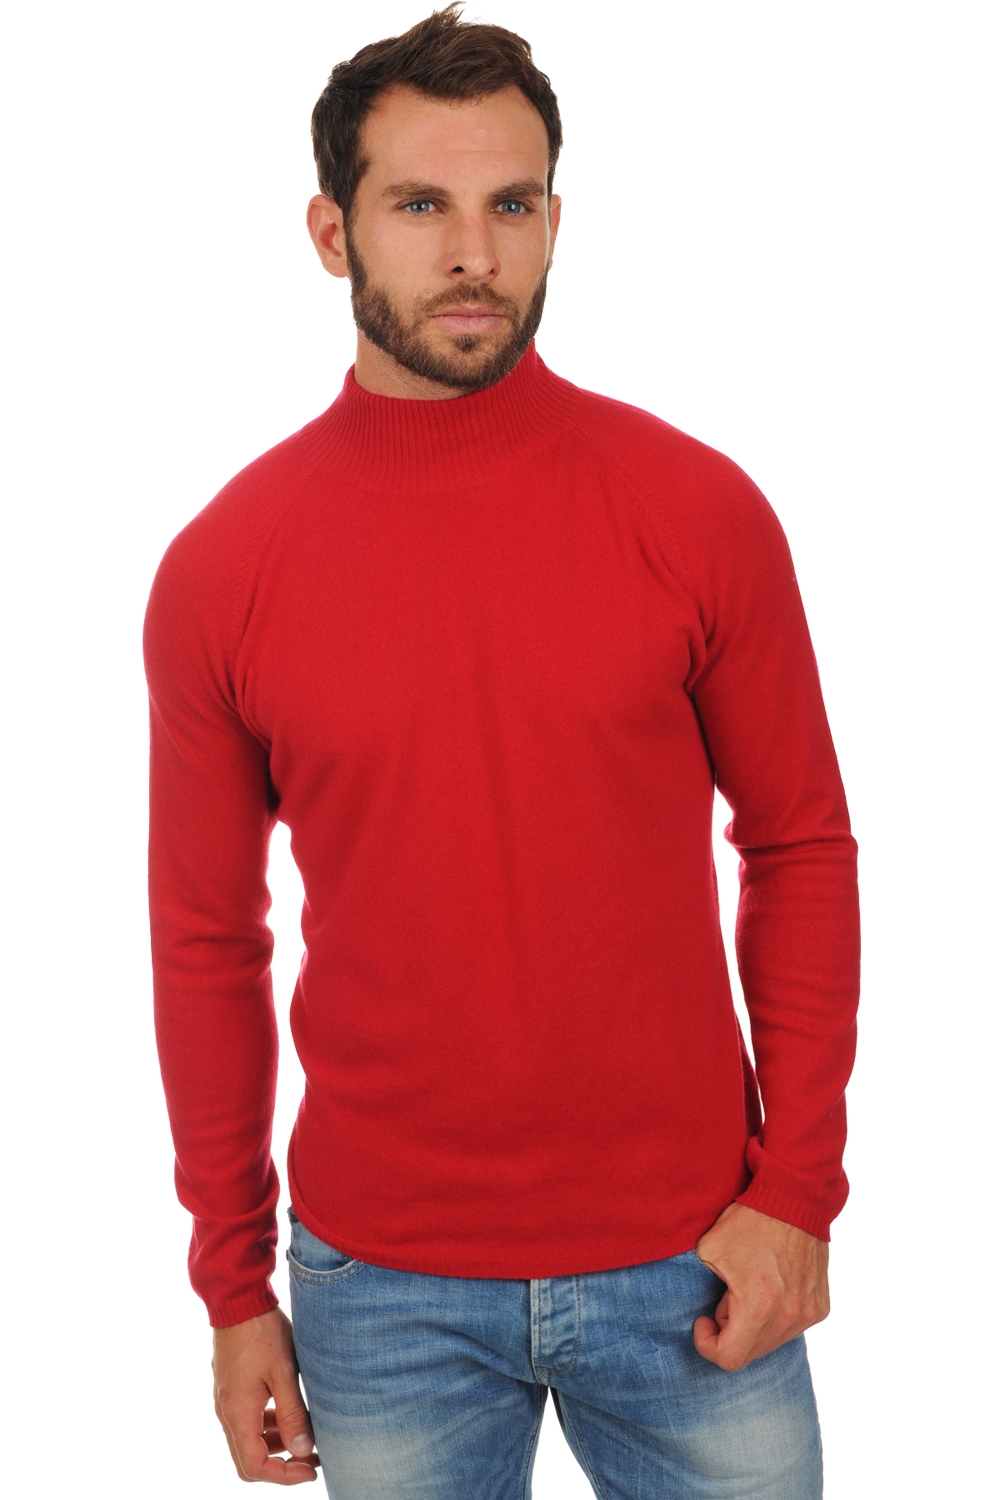 Cashmere men roll neck frederic blood red xs